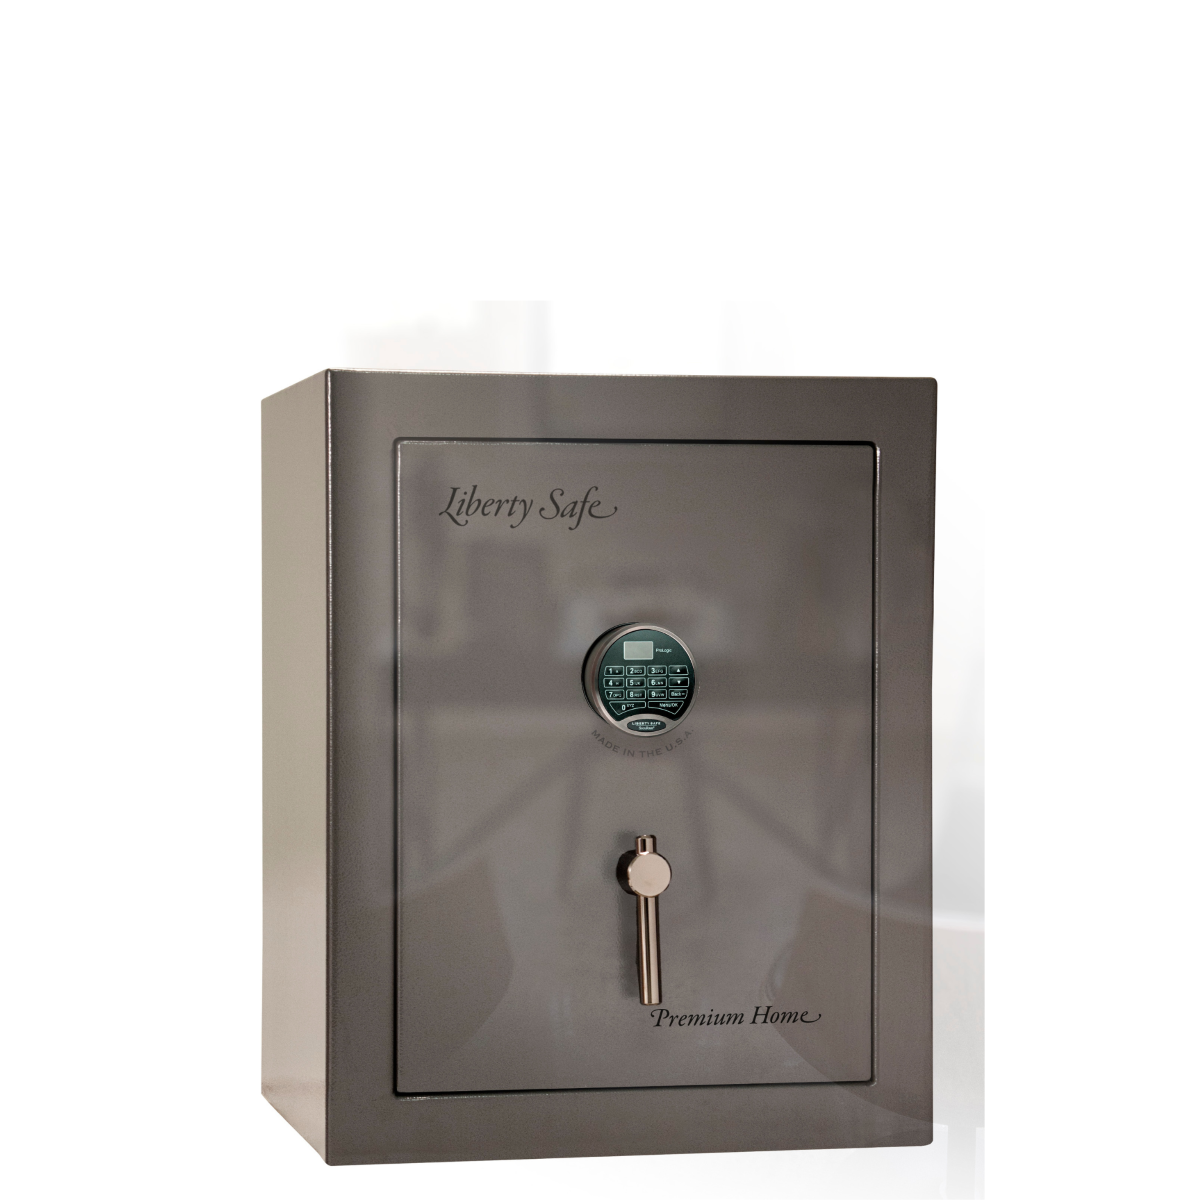 Premium Home Series | Level 7 Security | 2 Hour Fire Protection | 12 | Dimensions: 42"(H) x 24"(W) x 20.25"(D) | Champagne Gloss - Closed Door